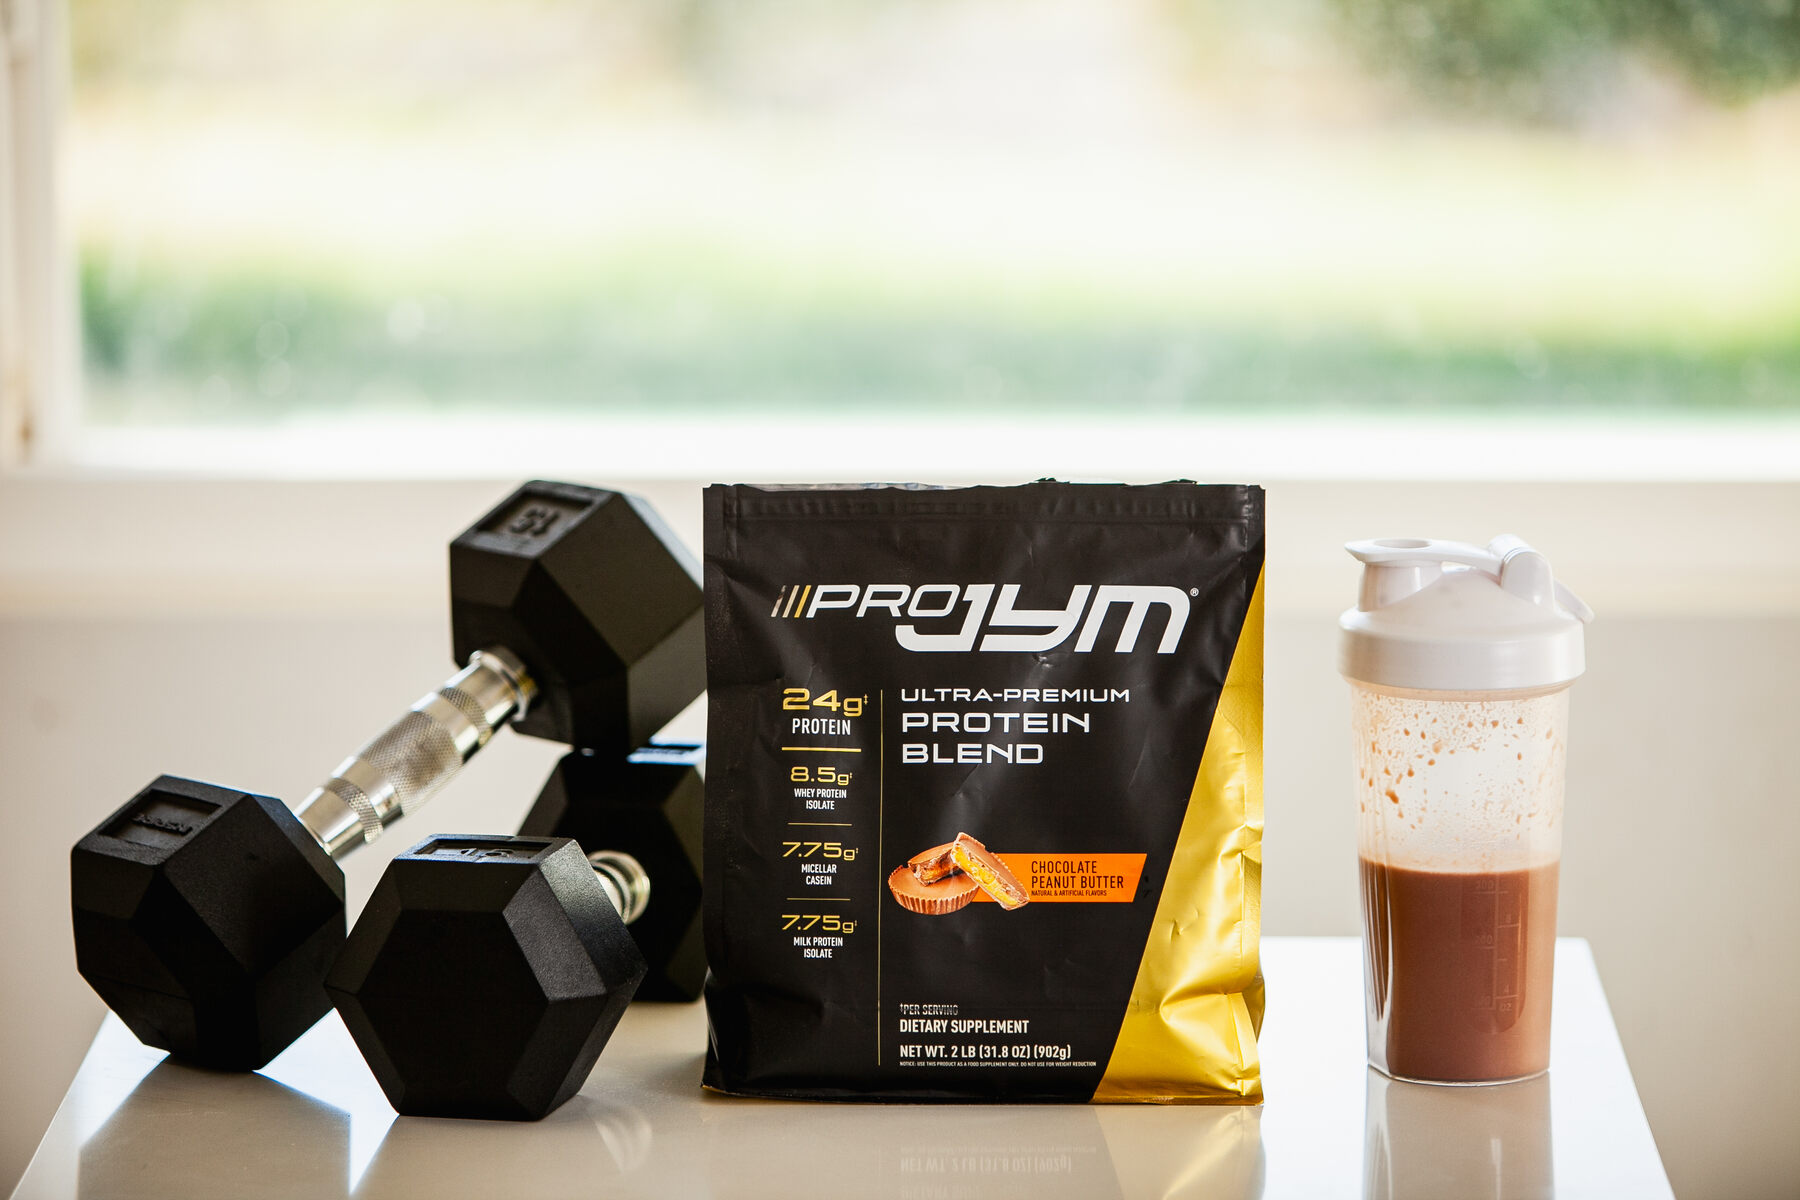 Pro Jym Protein supplement bag and shaker next to a dumbbell on a white surface